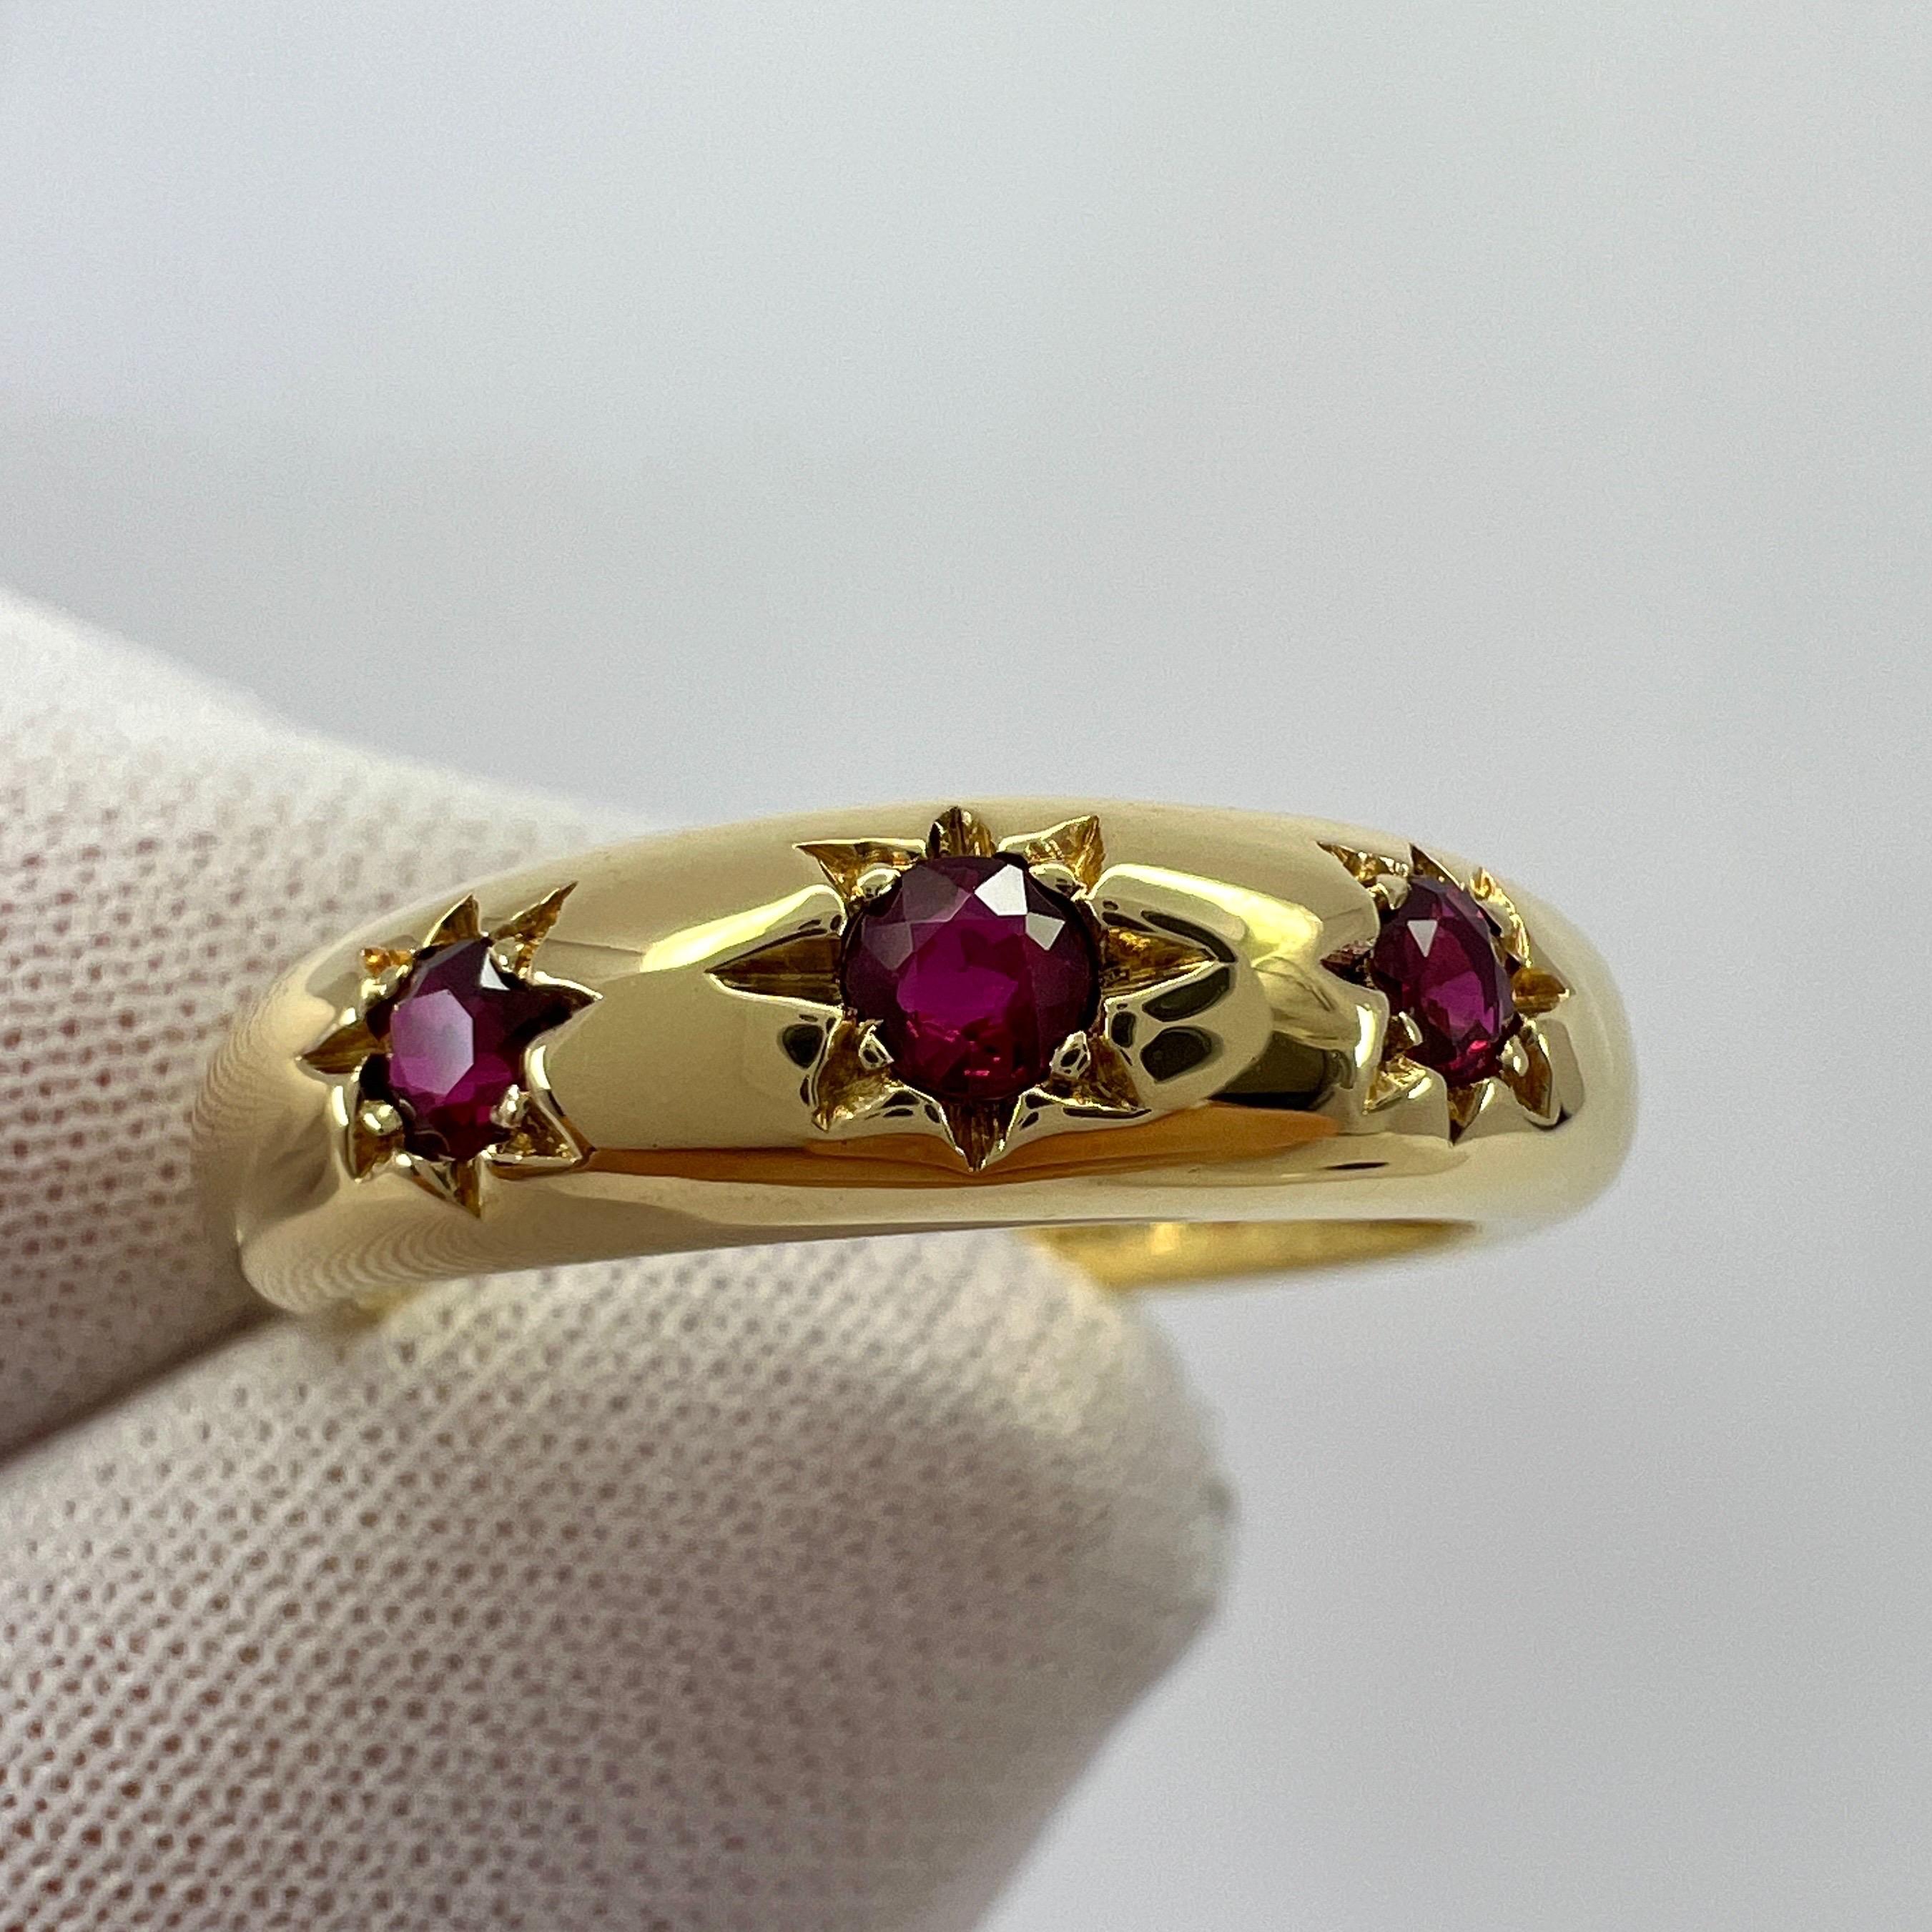 Rare Vintage Van Cleef & Arpels Star Set Ruby 18k Yellow Gold Three Stone Ring For Sale 3